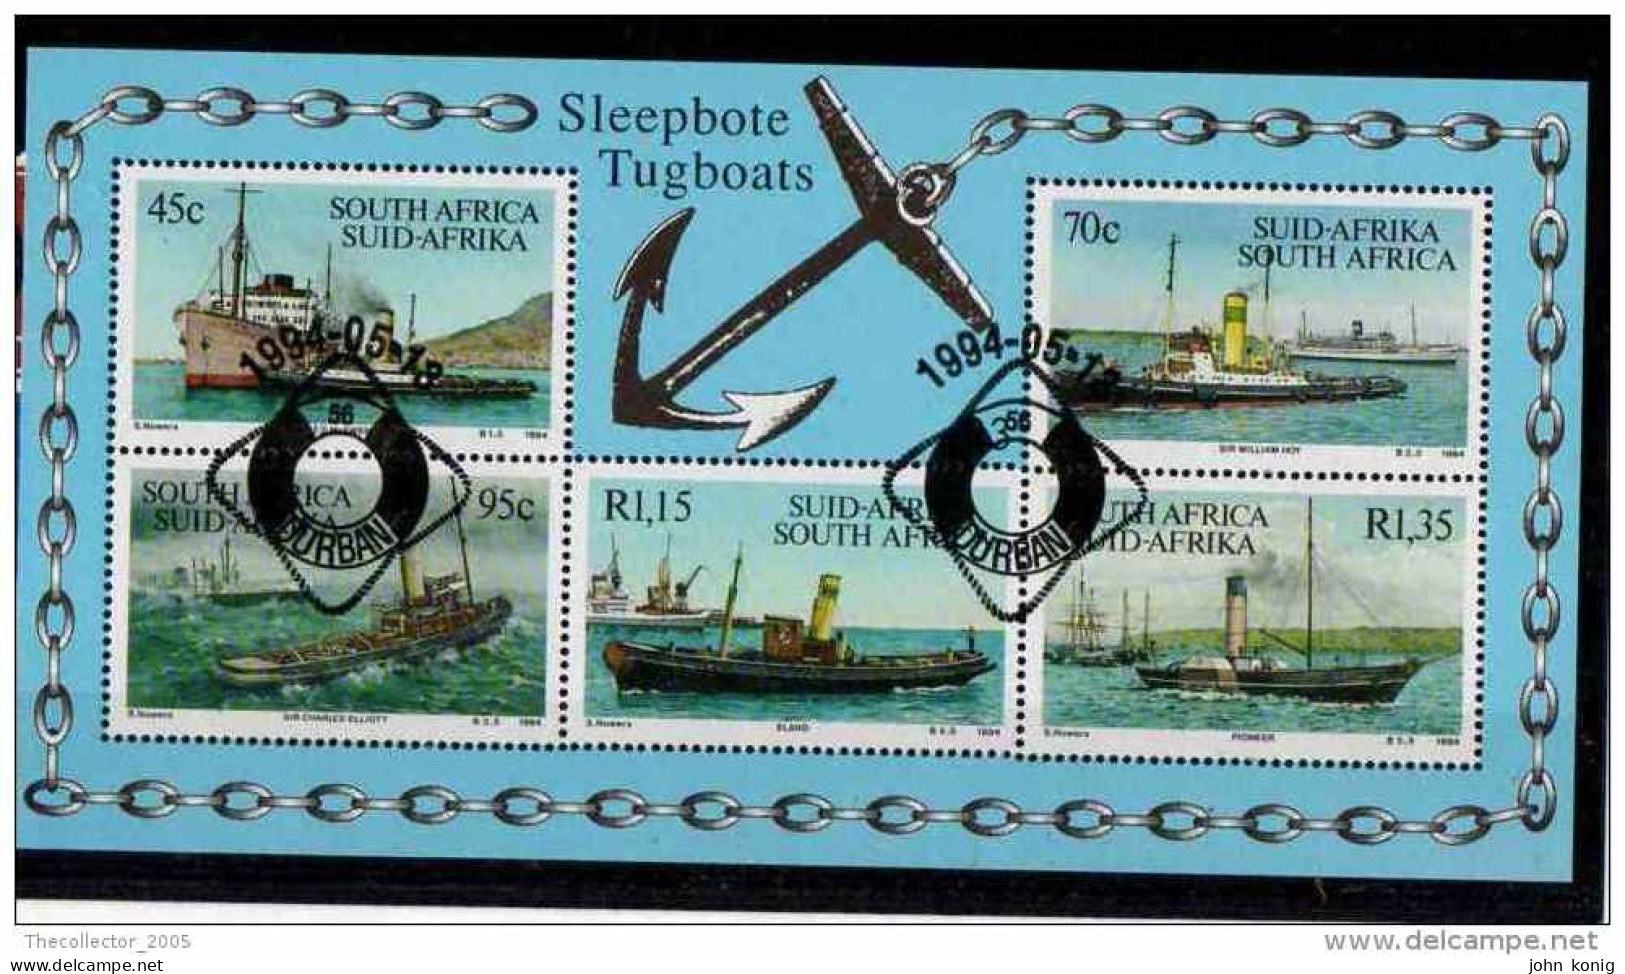 FOGLIETTO-STAMPS SHEET - SUD AFRICA-SOUTH AFRICA-SUID AFRIKA - NAVI A VAPORE - SLEEPBOTE TUGBOATS (1994) - Blocs-feuillets